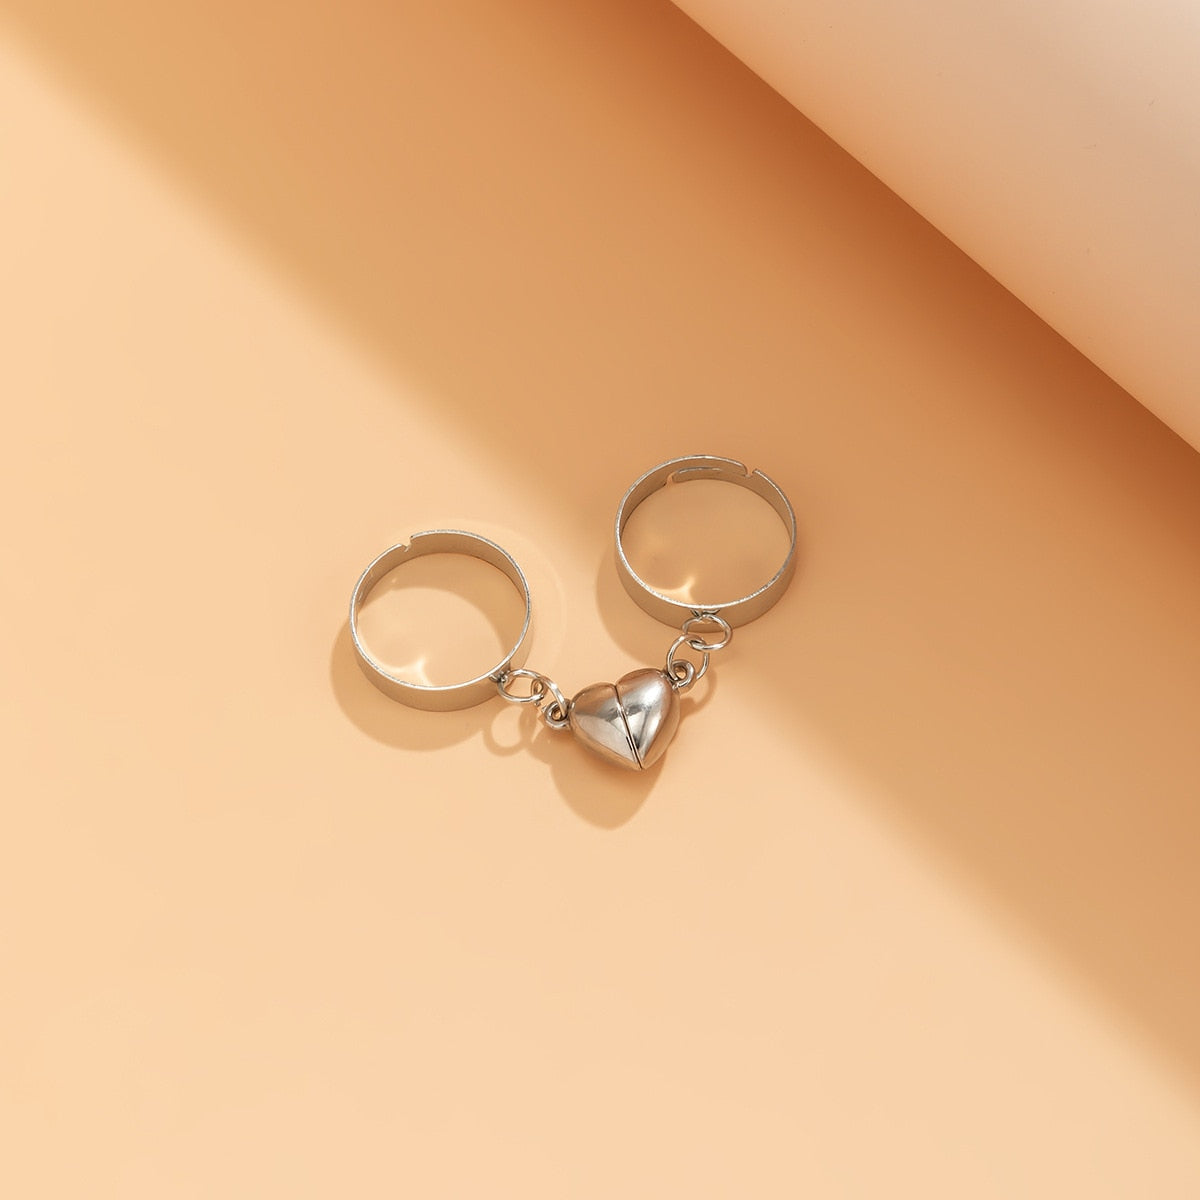 Amazon.com: Love Heart Friendship Rings Set for Women Men Geometric Best  Friend BFF Promise Rings for 2 Girls Friendship Gift Jewelry Christmas:  Clothing, Shoes & Jewelry